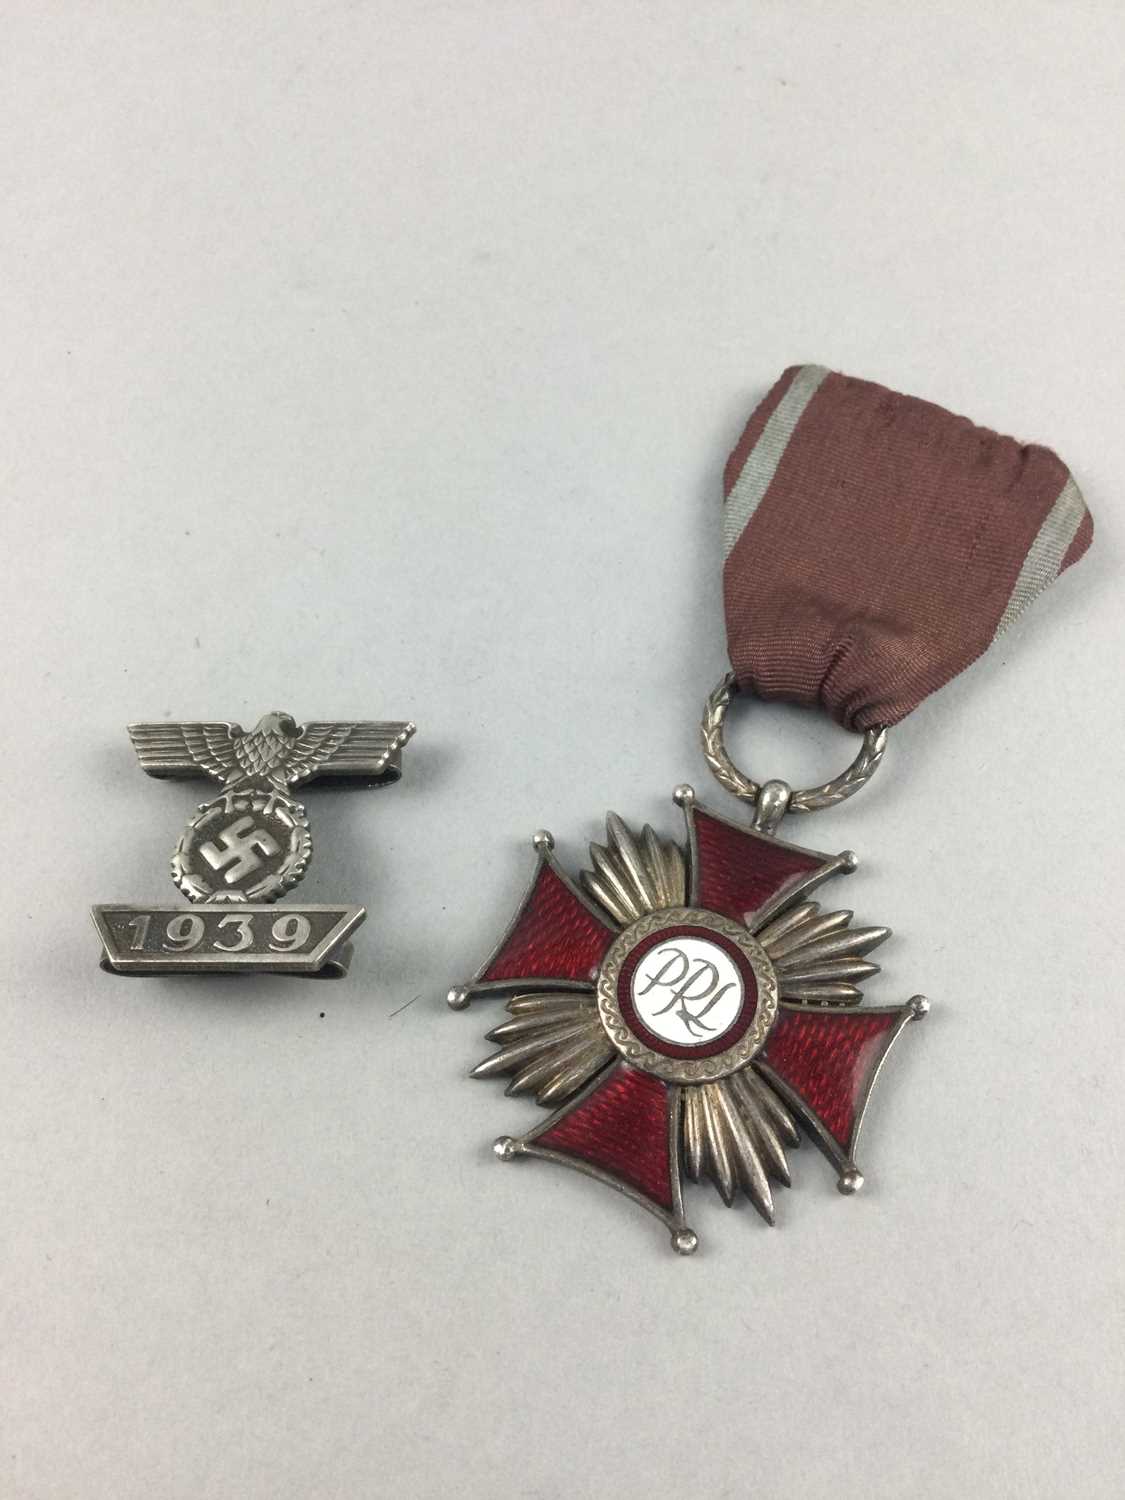 Lot 93 - A POLISH ORDER OF MERIT MEDAL ALONG WITH A THIRD REICH BADGE